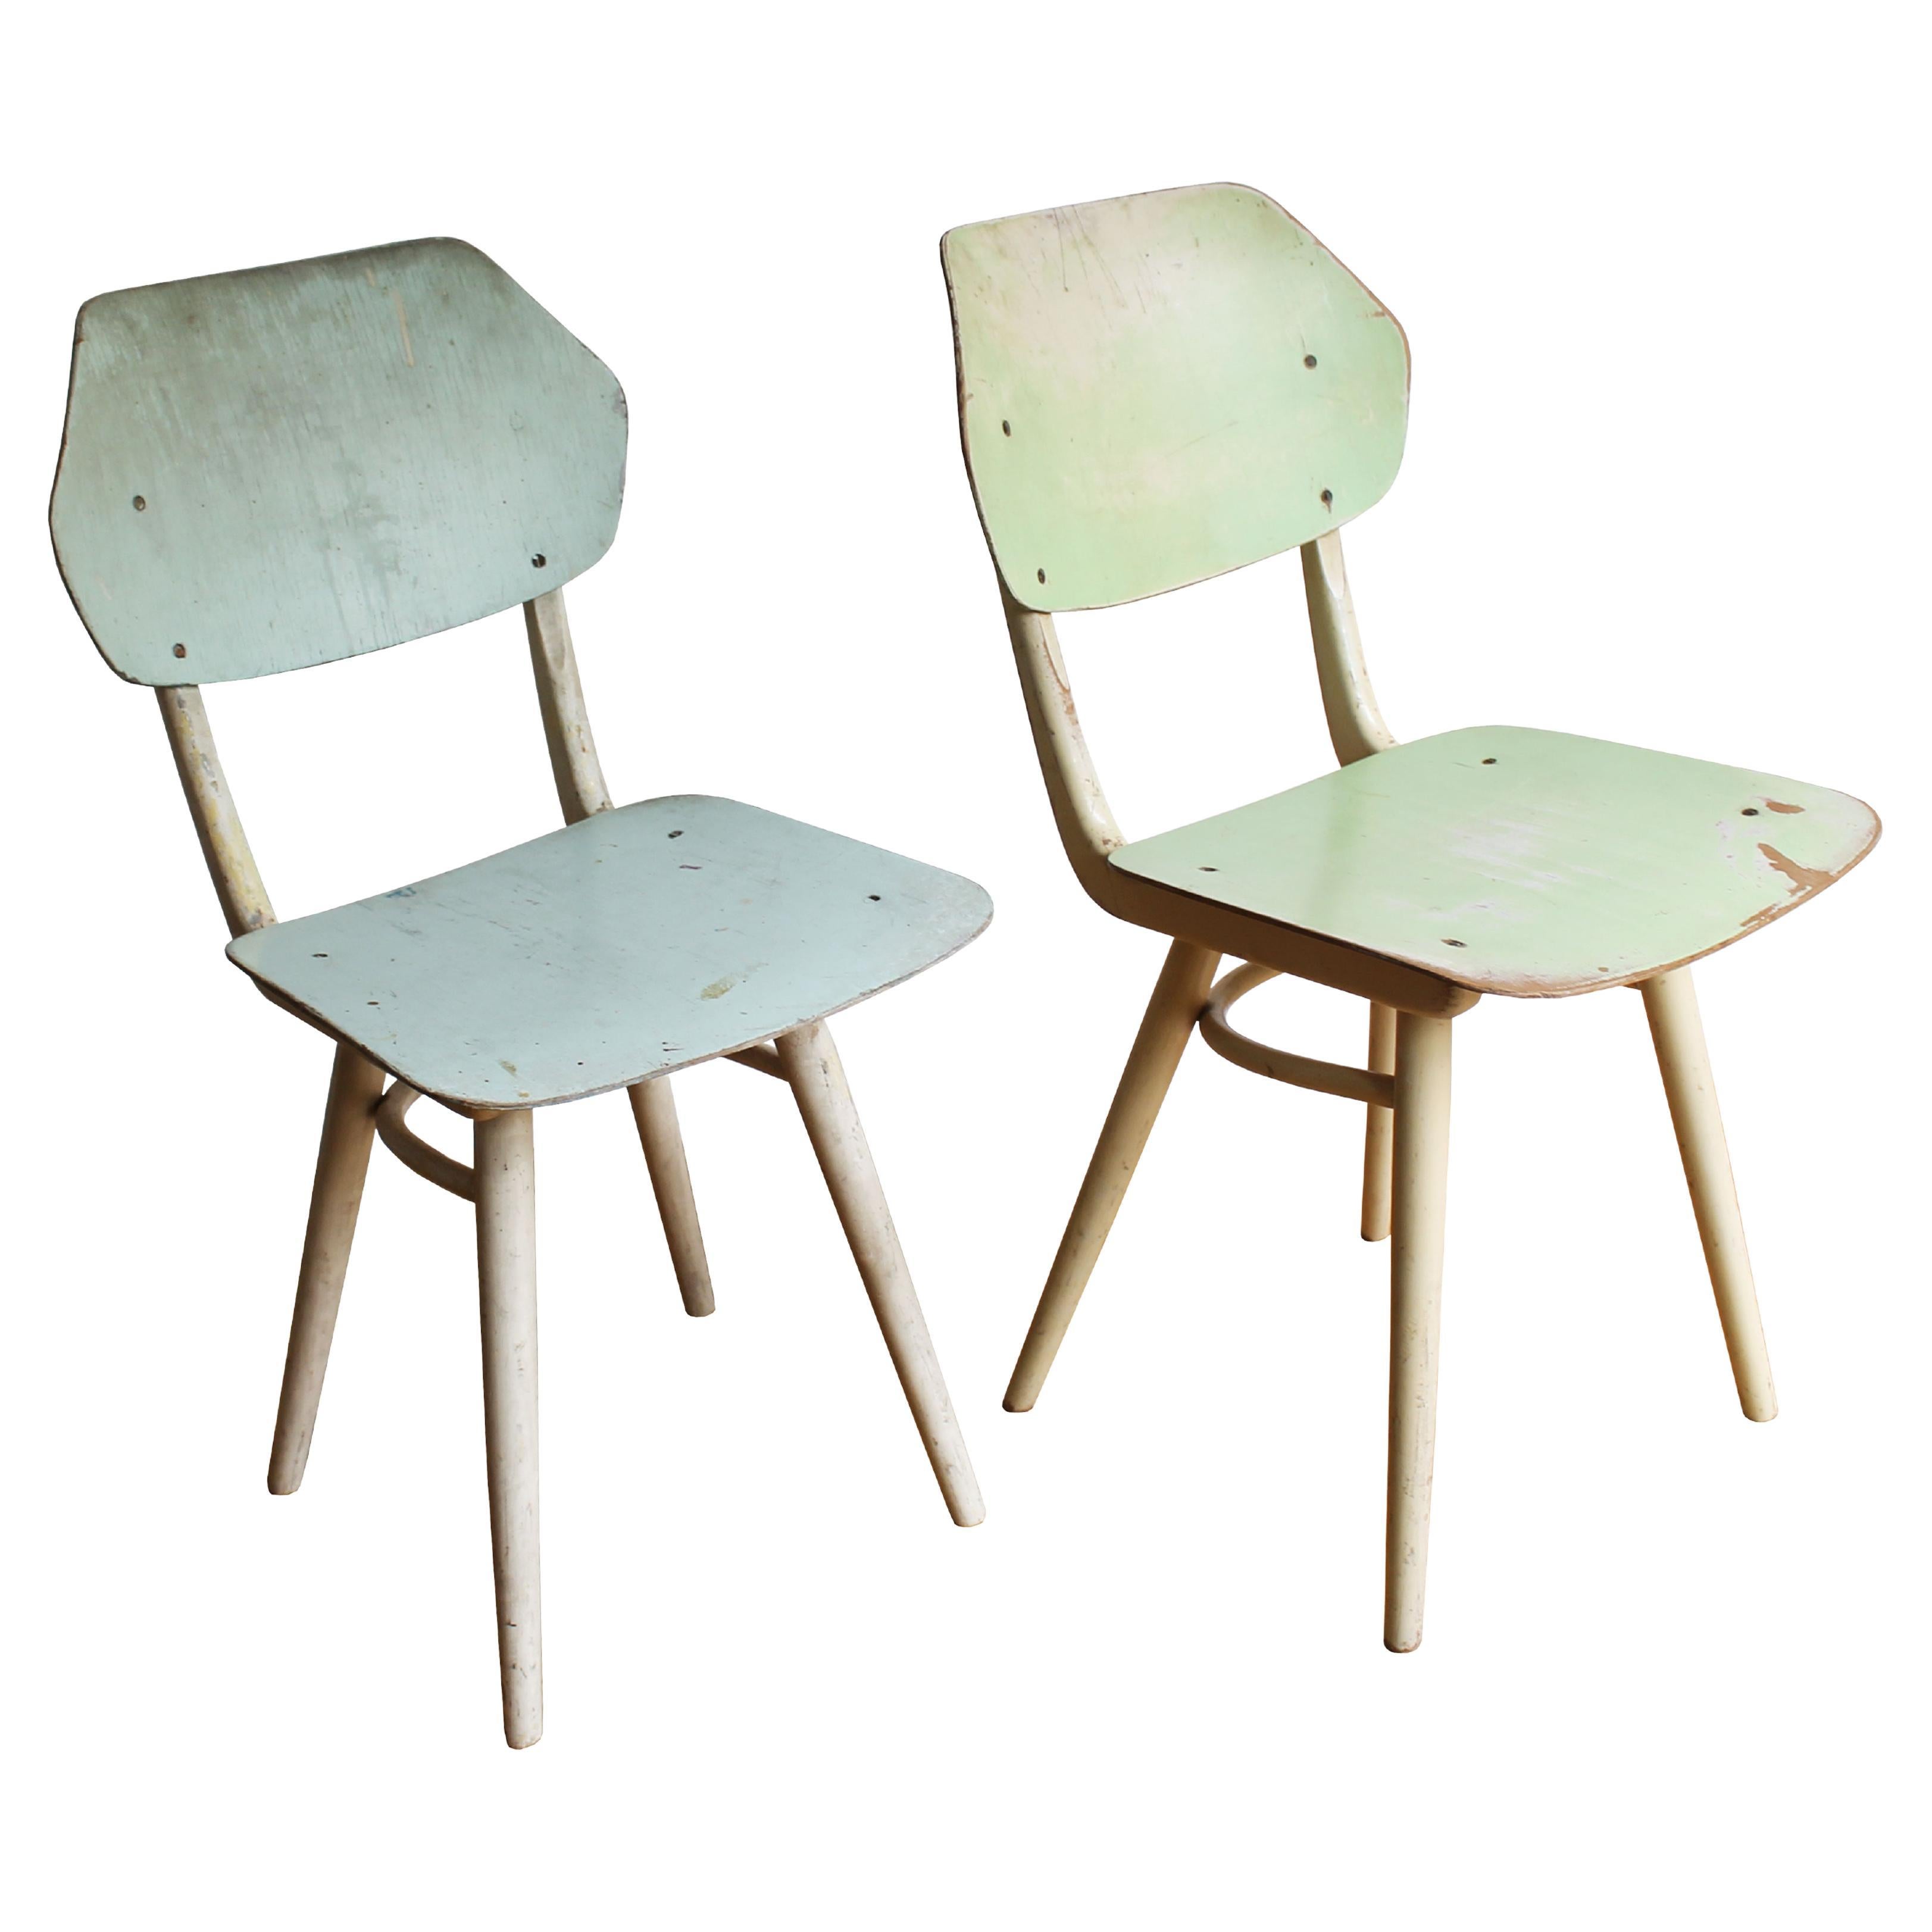 Pair of 1960's Mid Century Modern Dining Chairs by TON